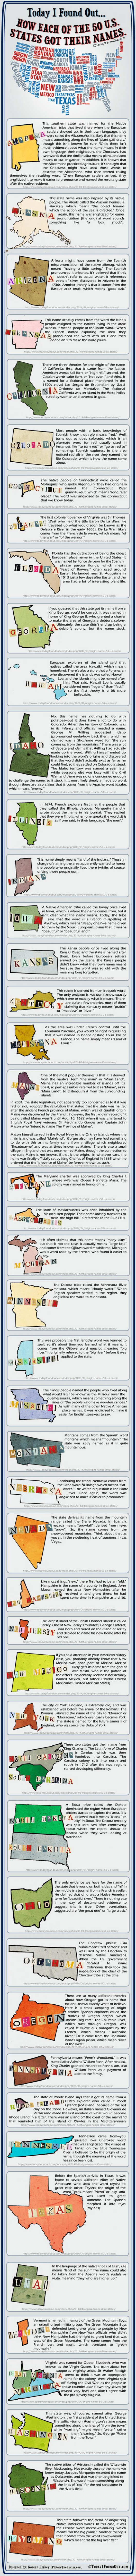 HOW ALL 50 U.S. STATES GOT THEIR NAMES